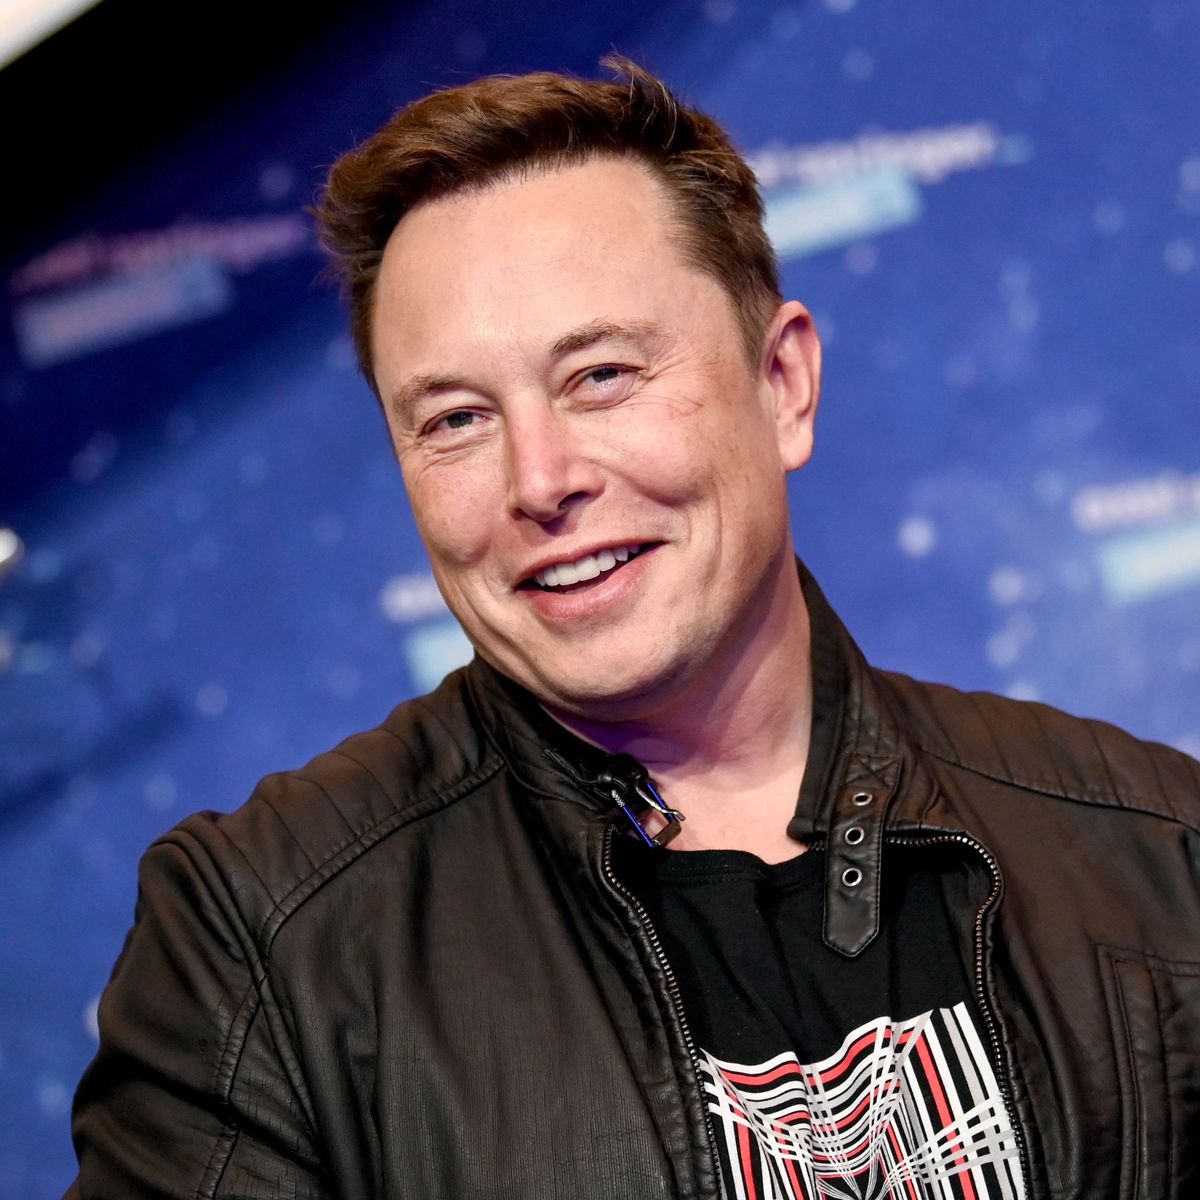 Does Elon Musk's Twitter Logo Change Prove Dogecoin Is Currency Of Future?